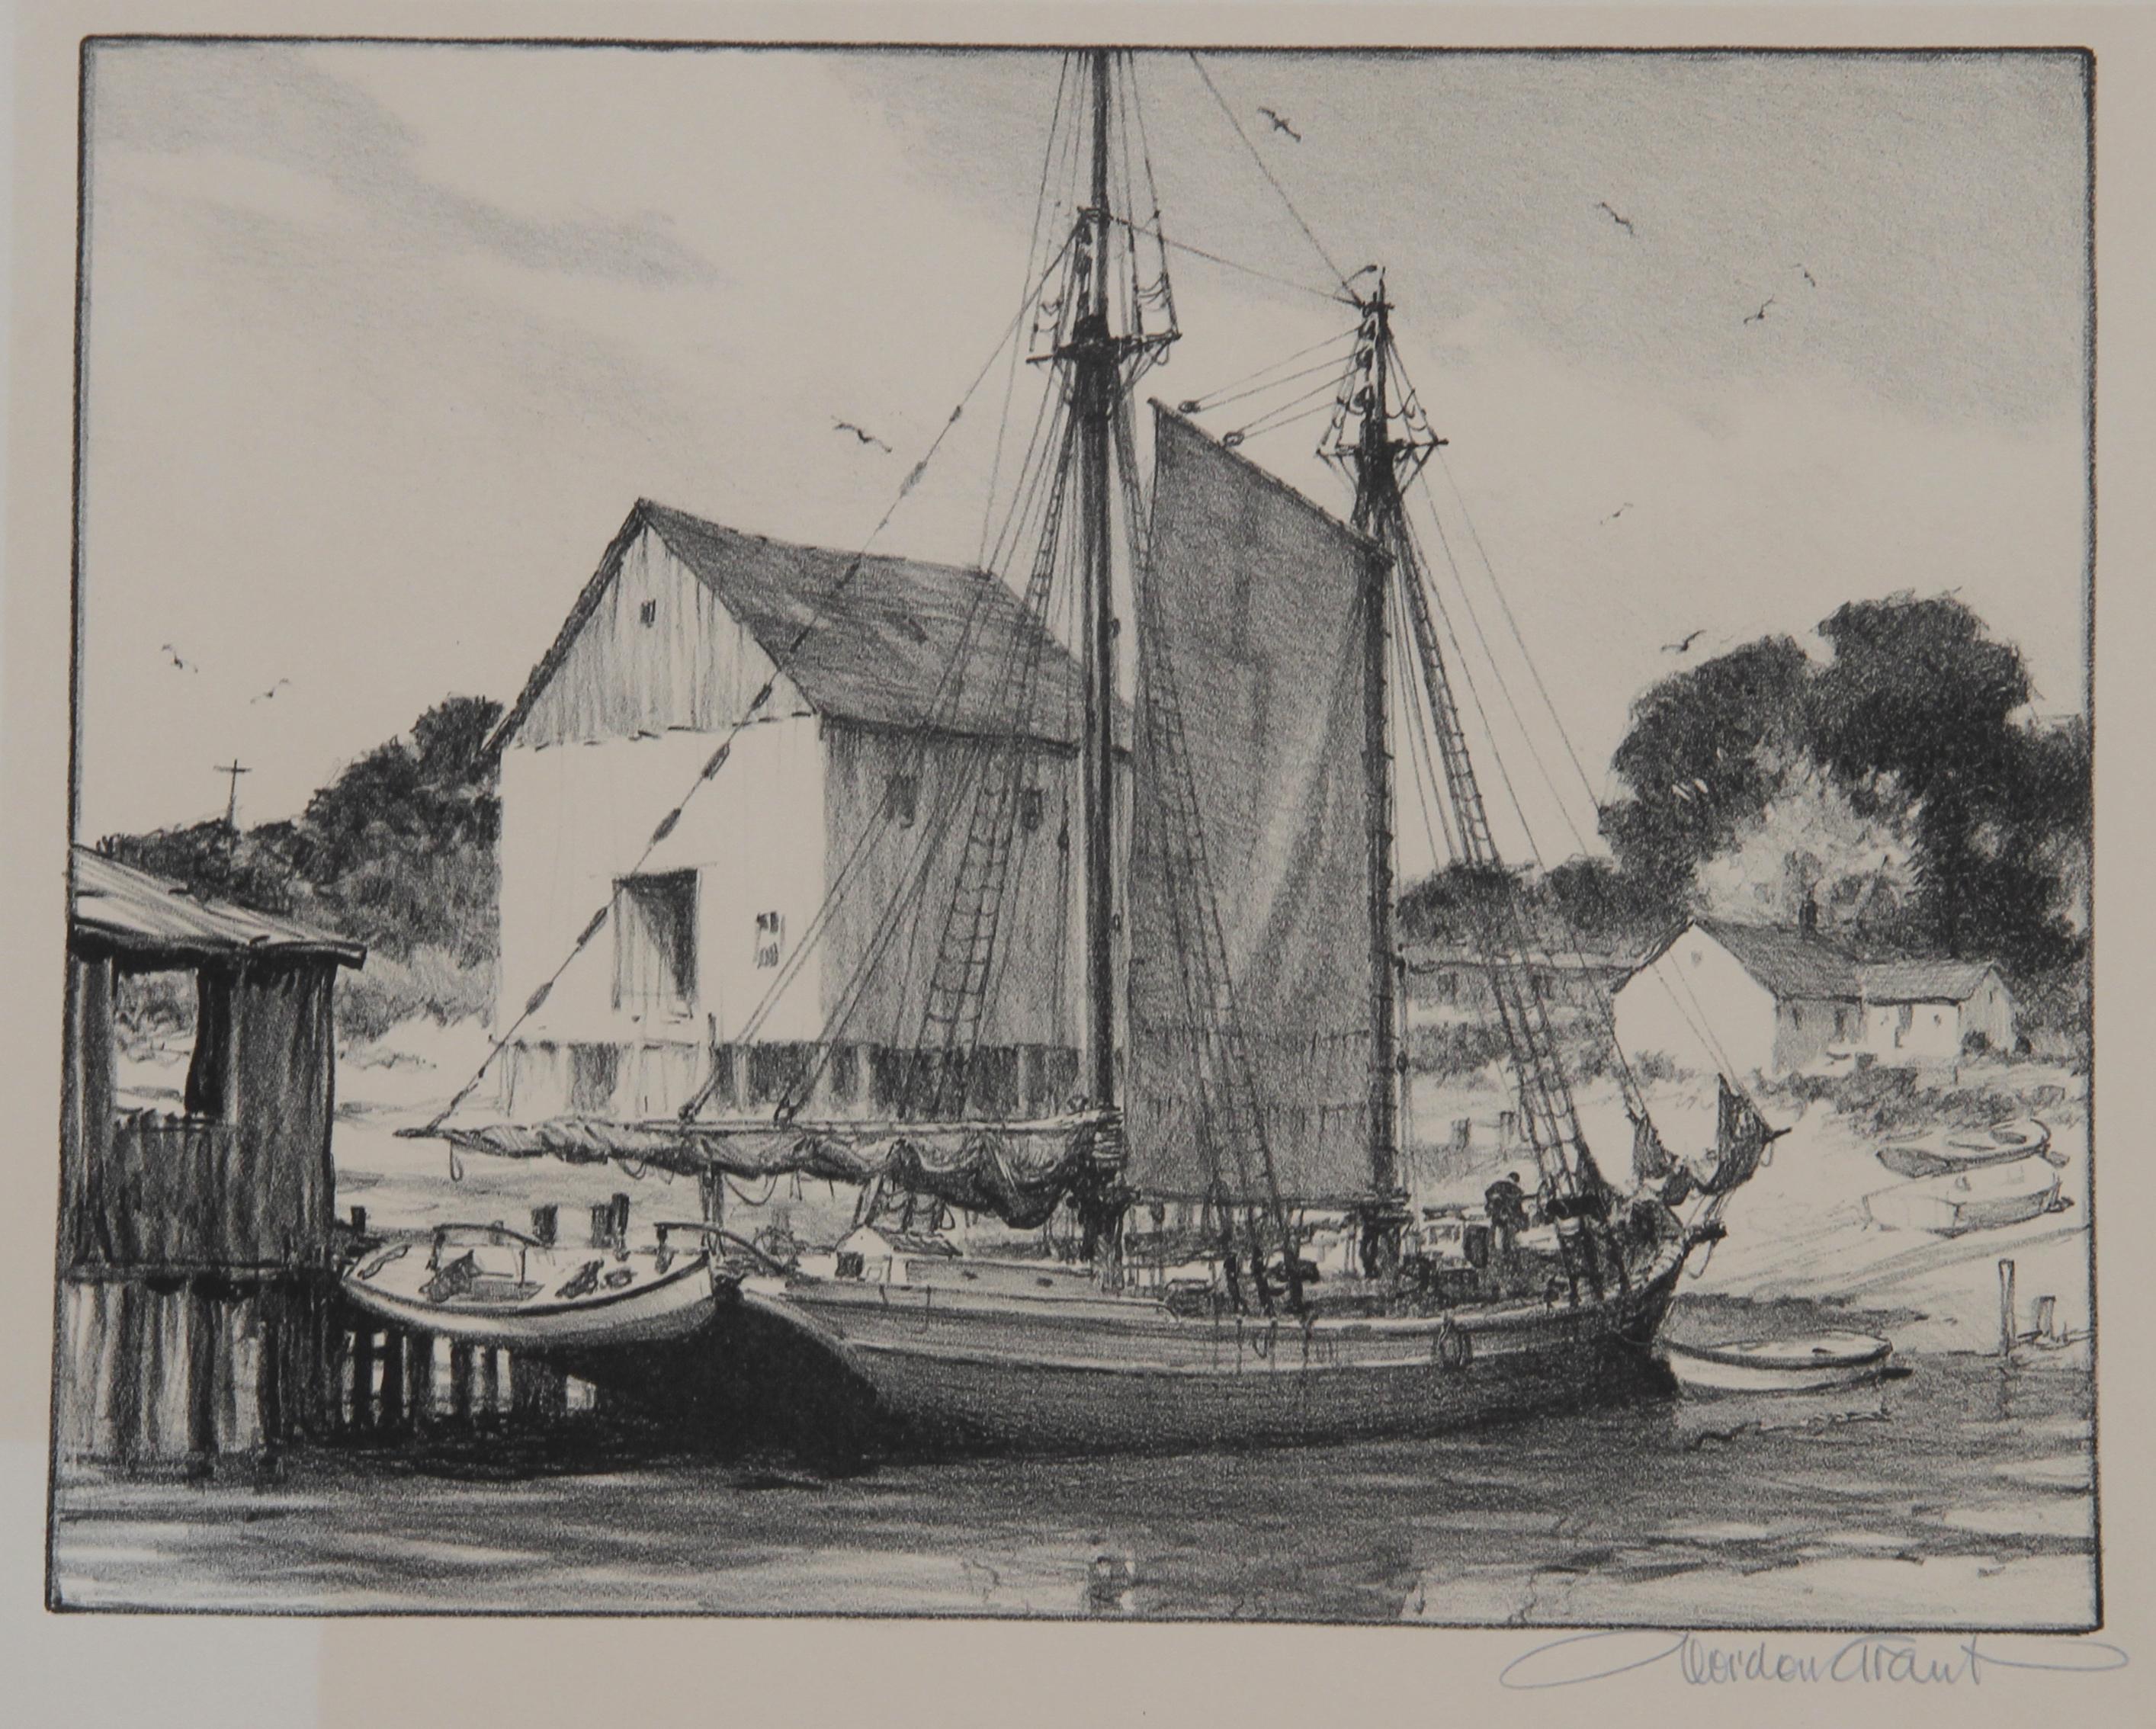 Old Coaster, Lithograph by Gordon Grant